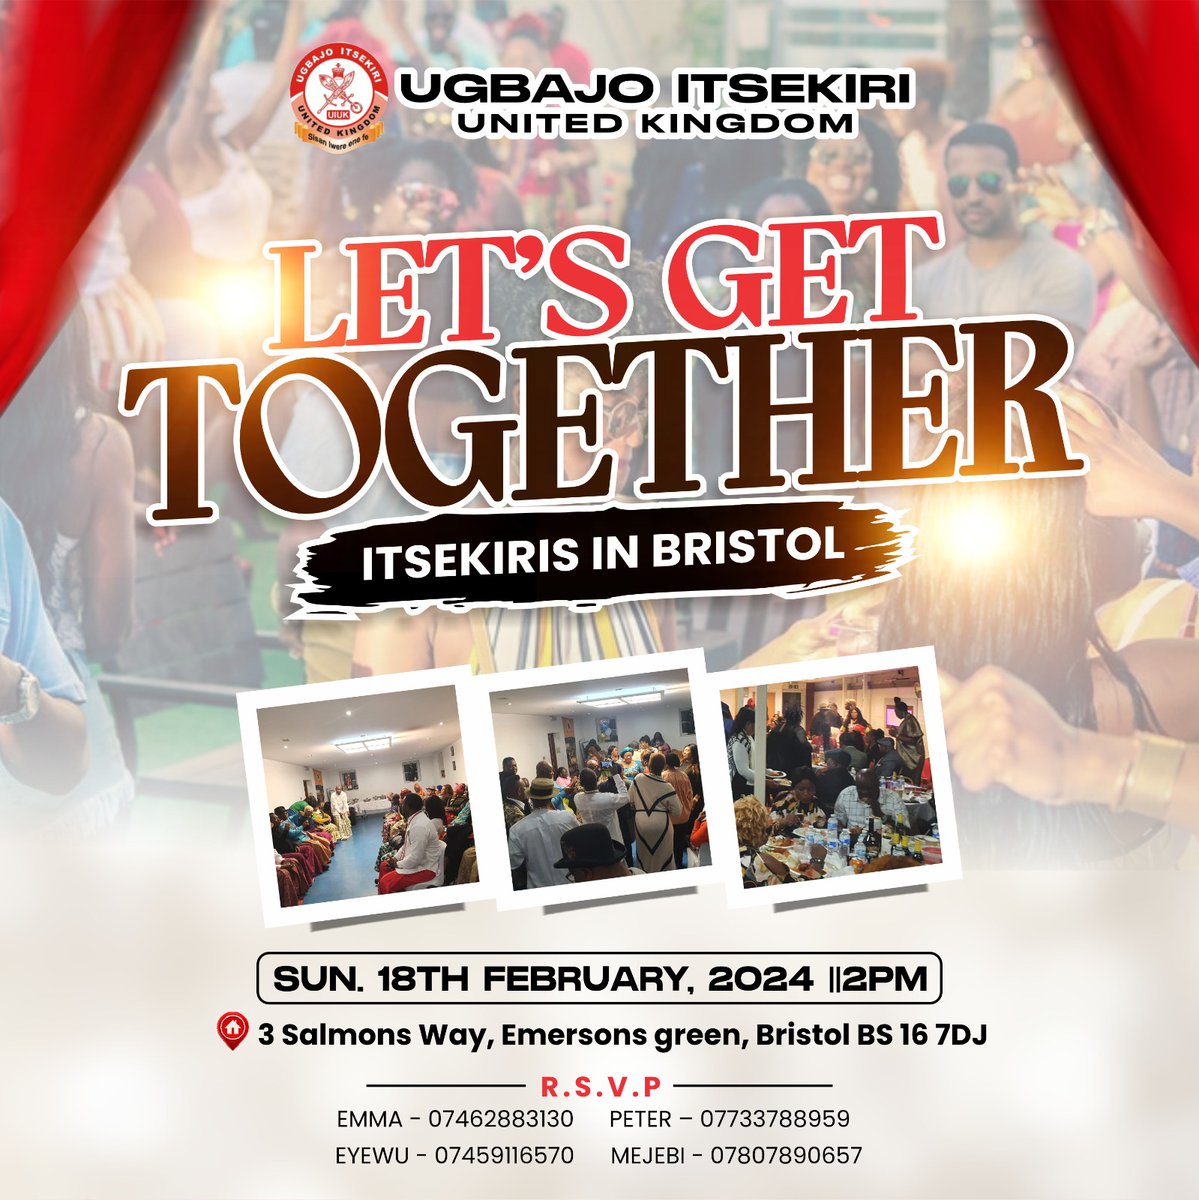 Calling all Itsekiris around the Bristol, South West England and South Wales areas.